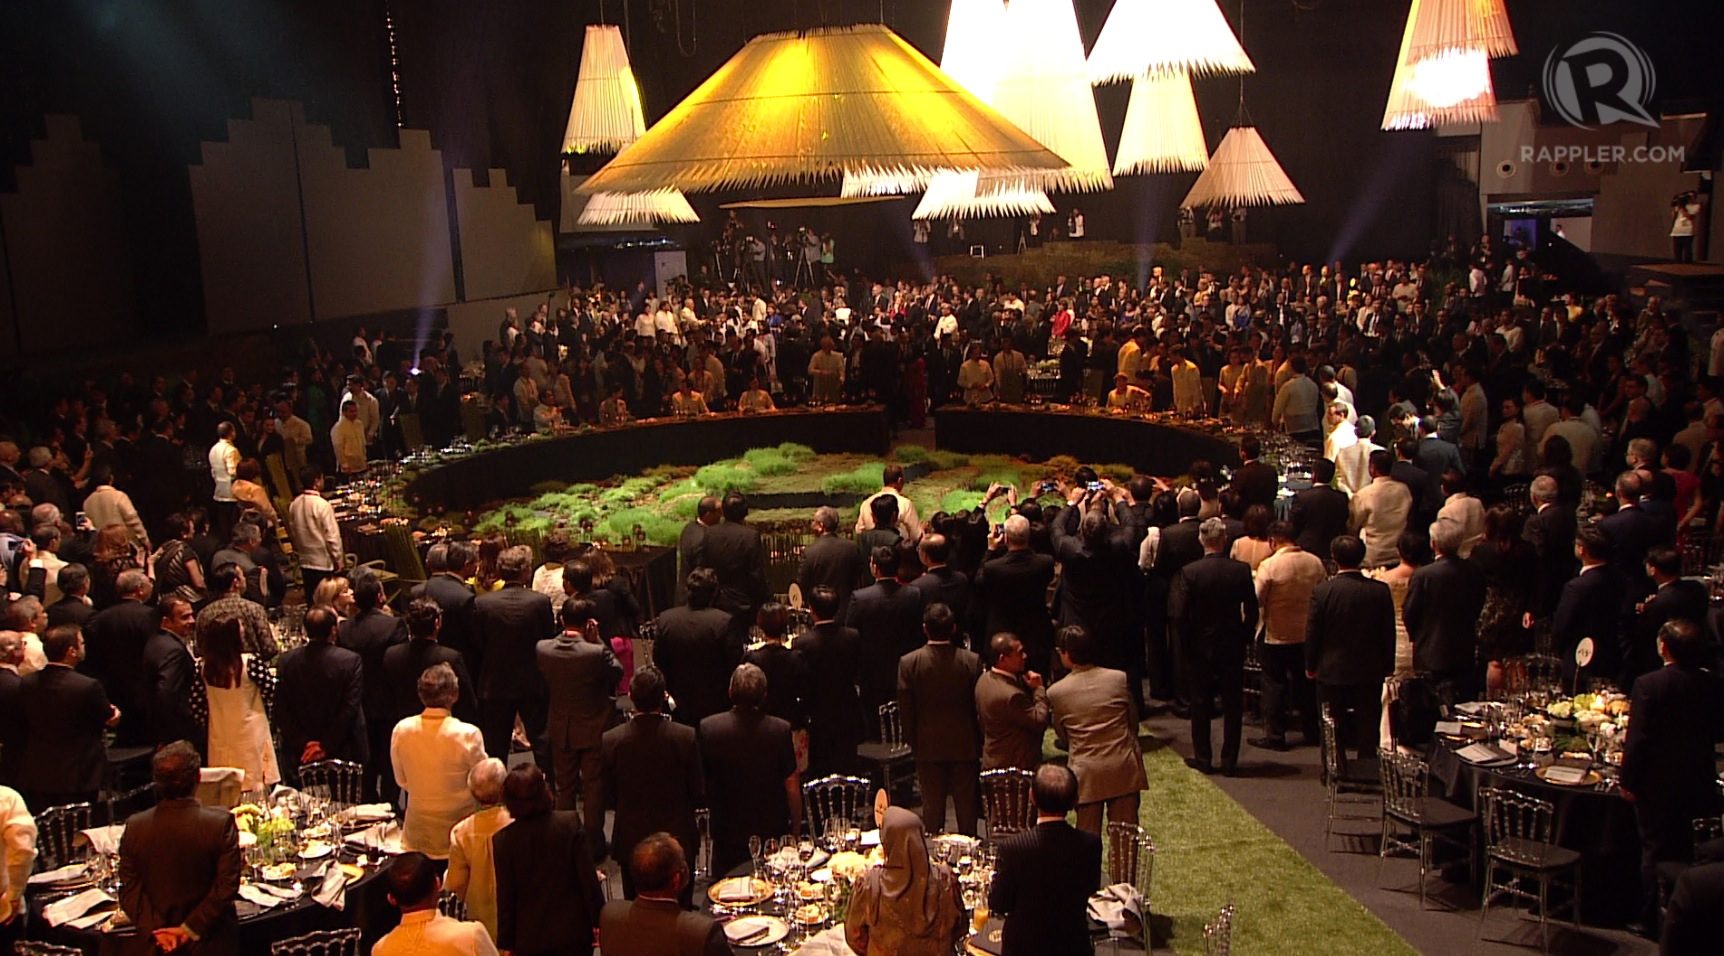 APEC DINNER. President Aquino says he was proud of how the MOA Arena was transformed for the APEC leaders' welcome dinner.  